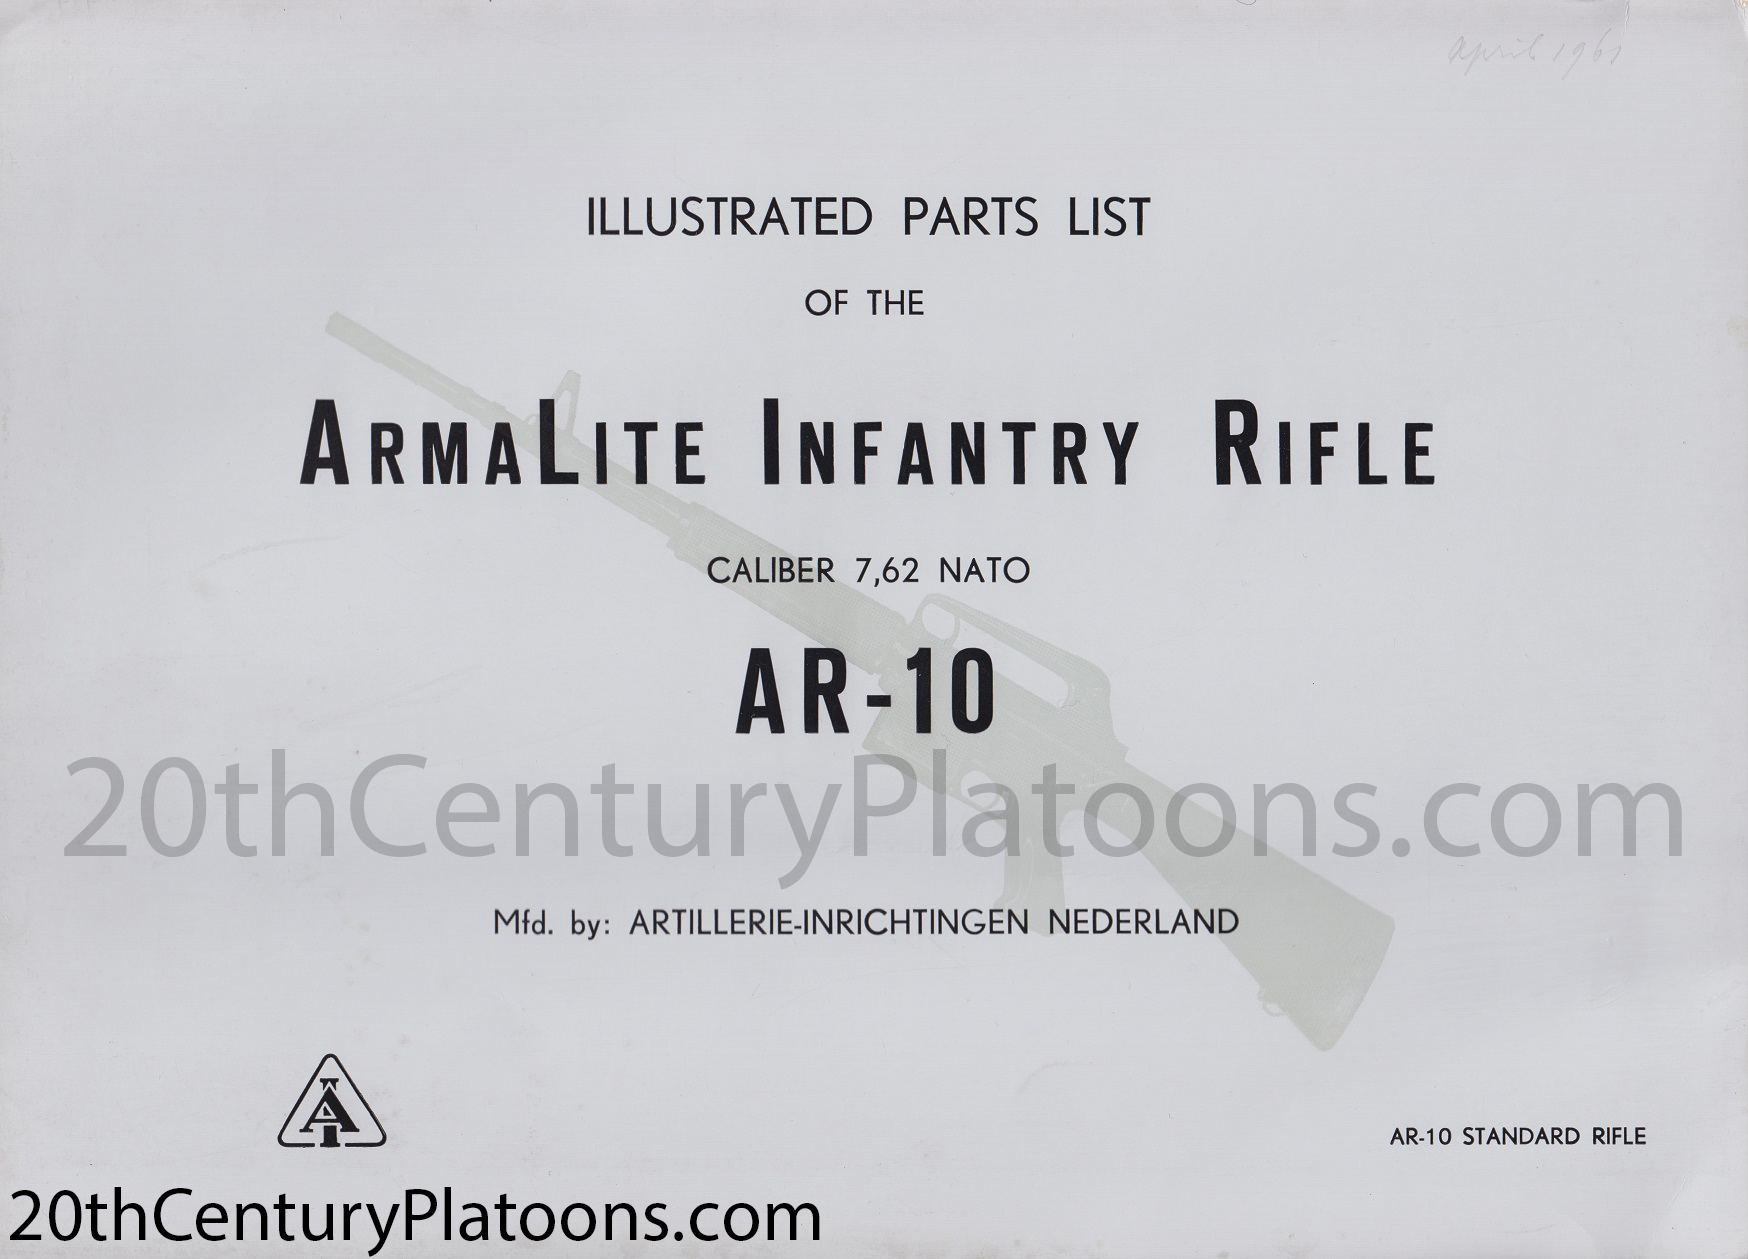 The cover page for the 1961 AI AR-10 parts list